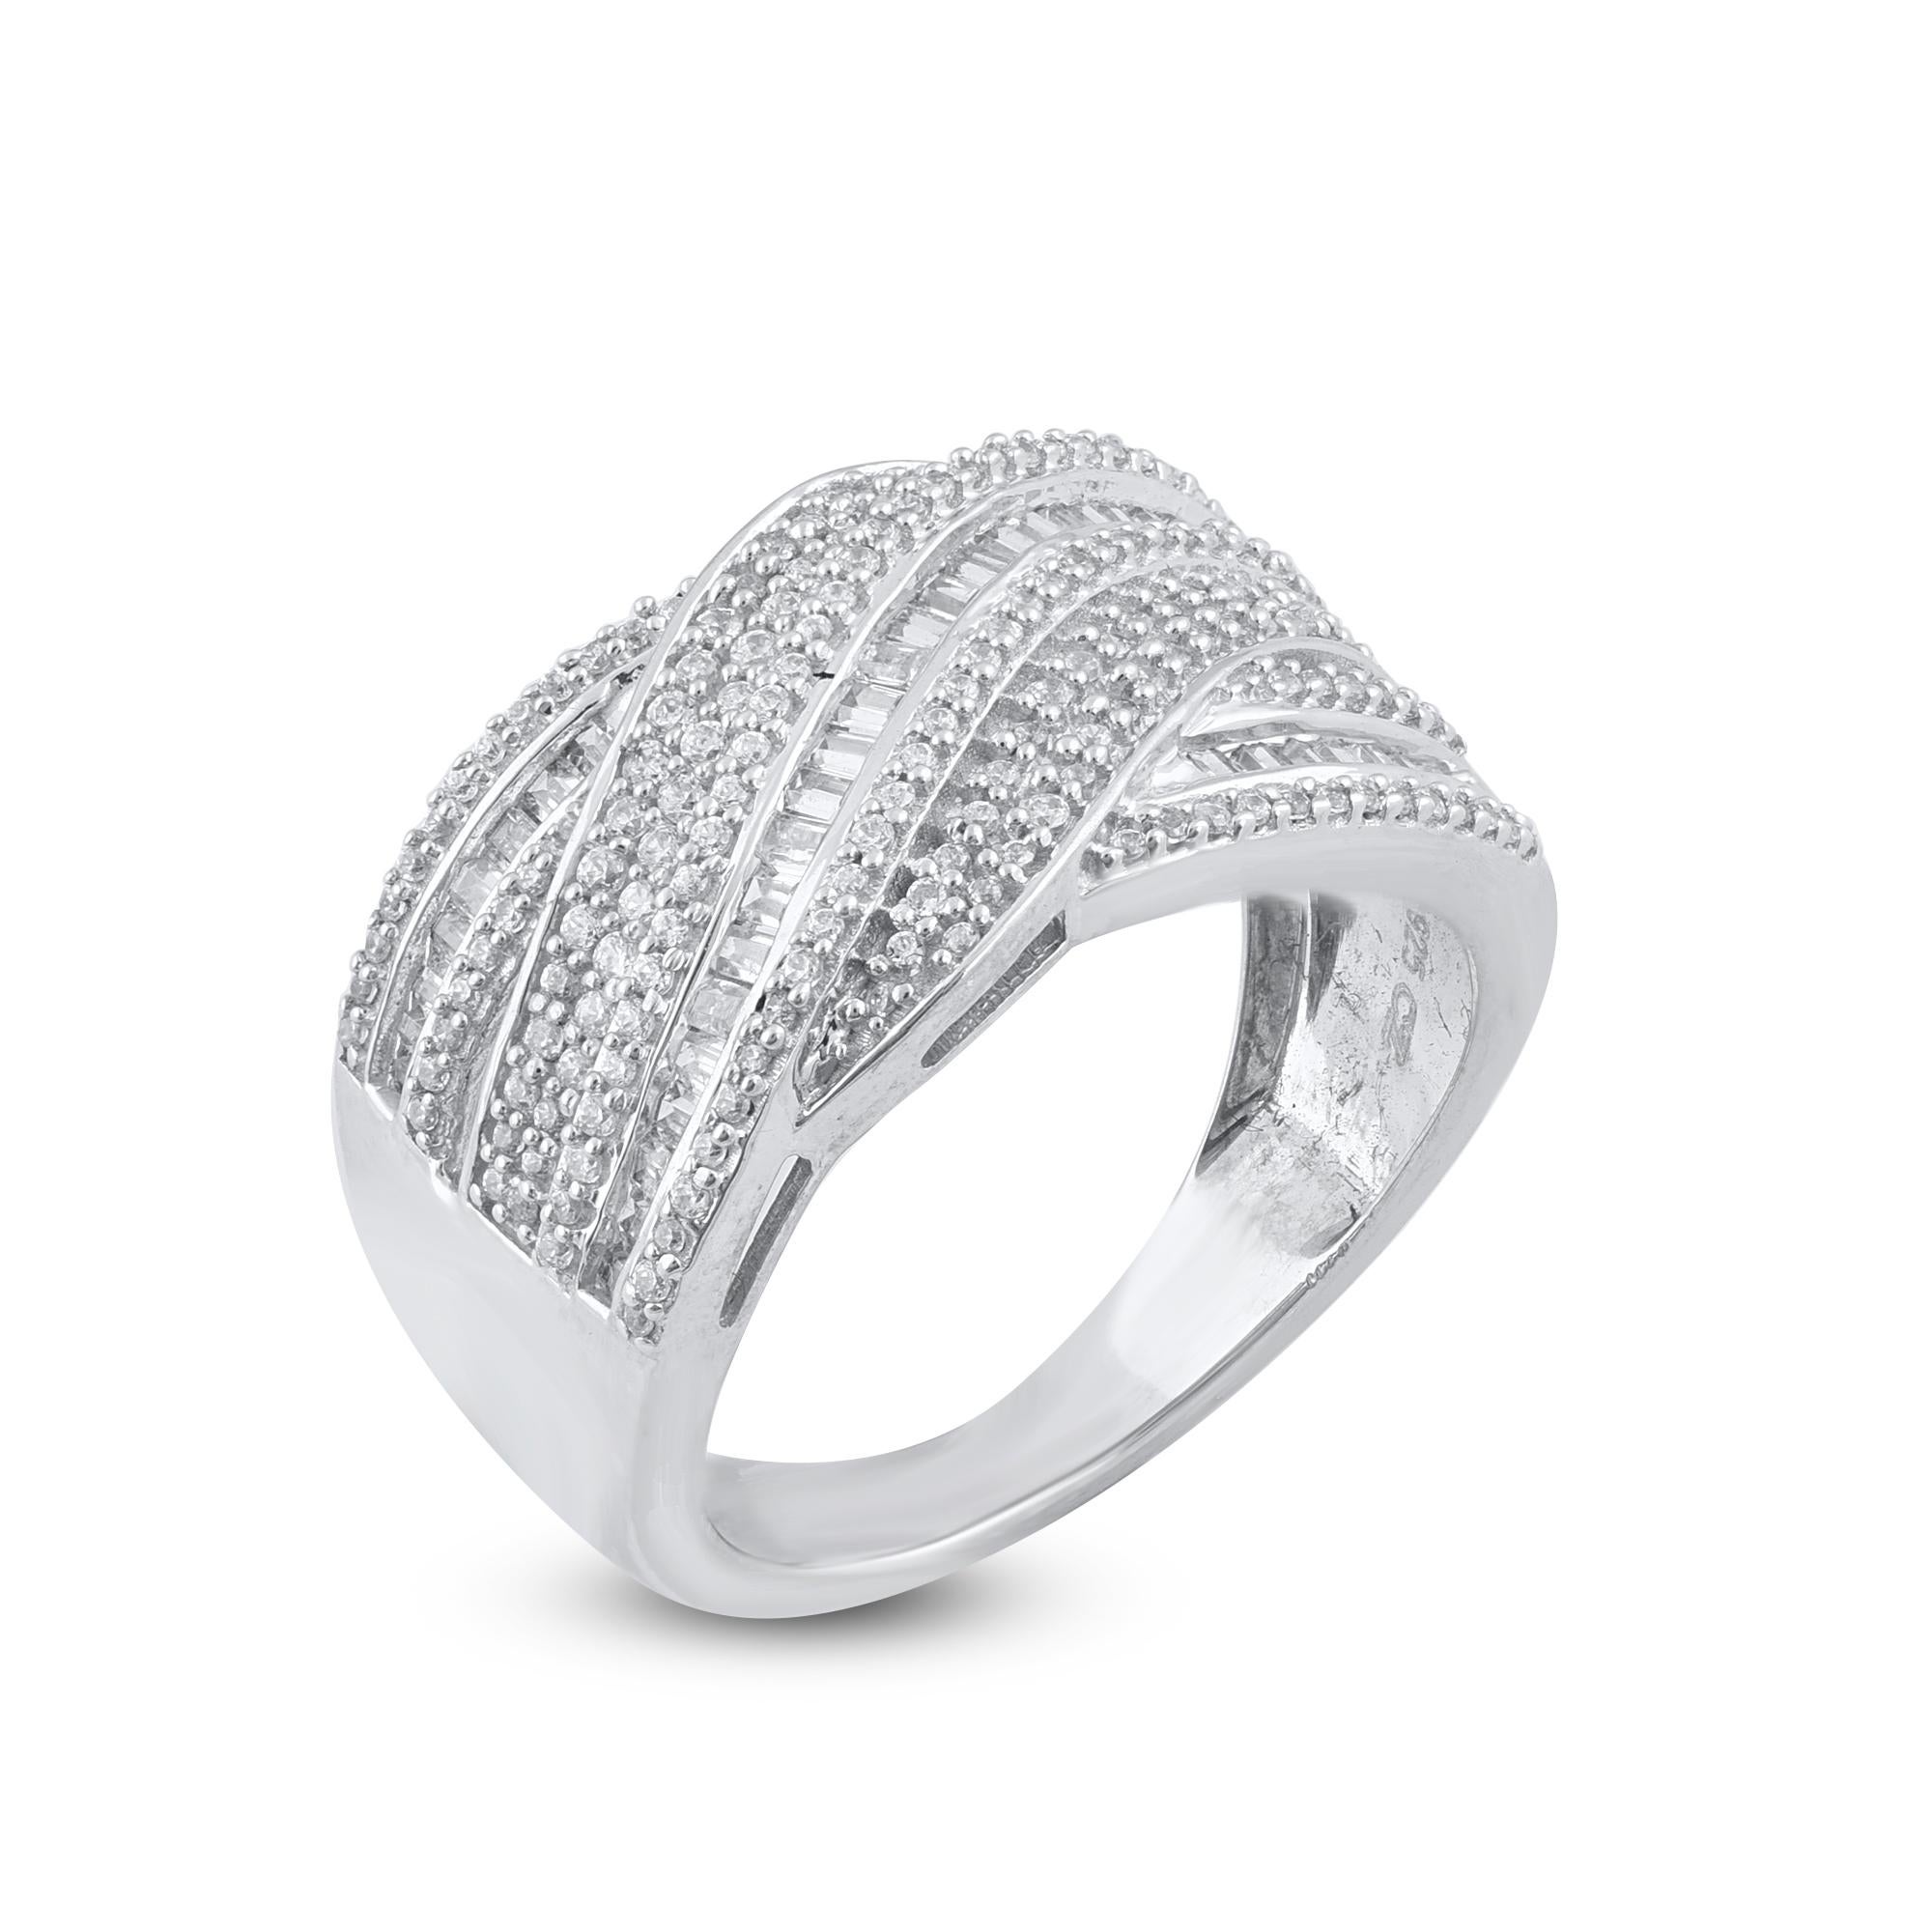 Exquisite 14K gold 0.75 carat diamond crisscross ring. Expertly Crafted of sparkling 14 karat white gold in high polish finish and set with 168 sparkling round and 47 baguette cut diamond set in channel and pave setting, We only use 100% natural and